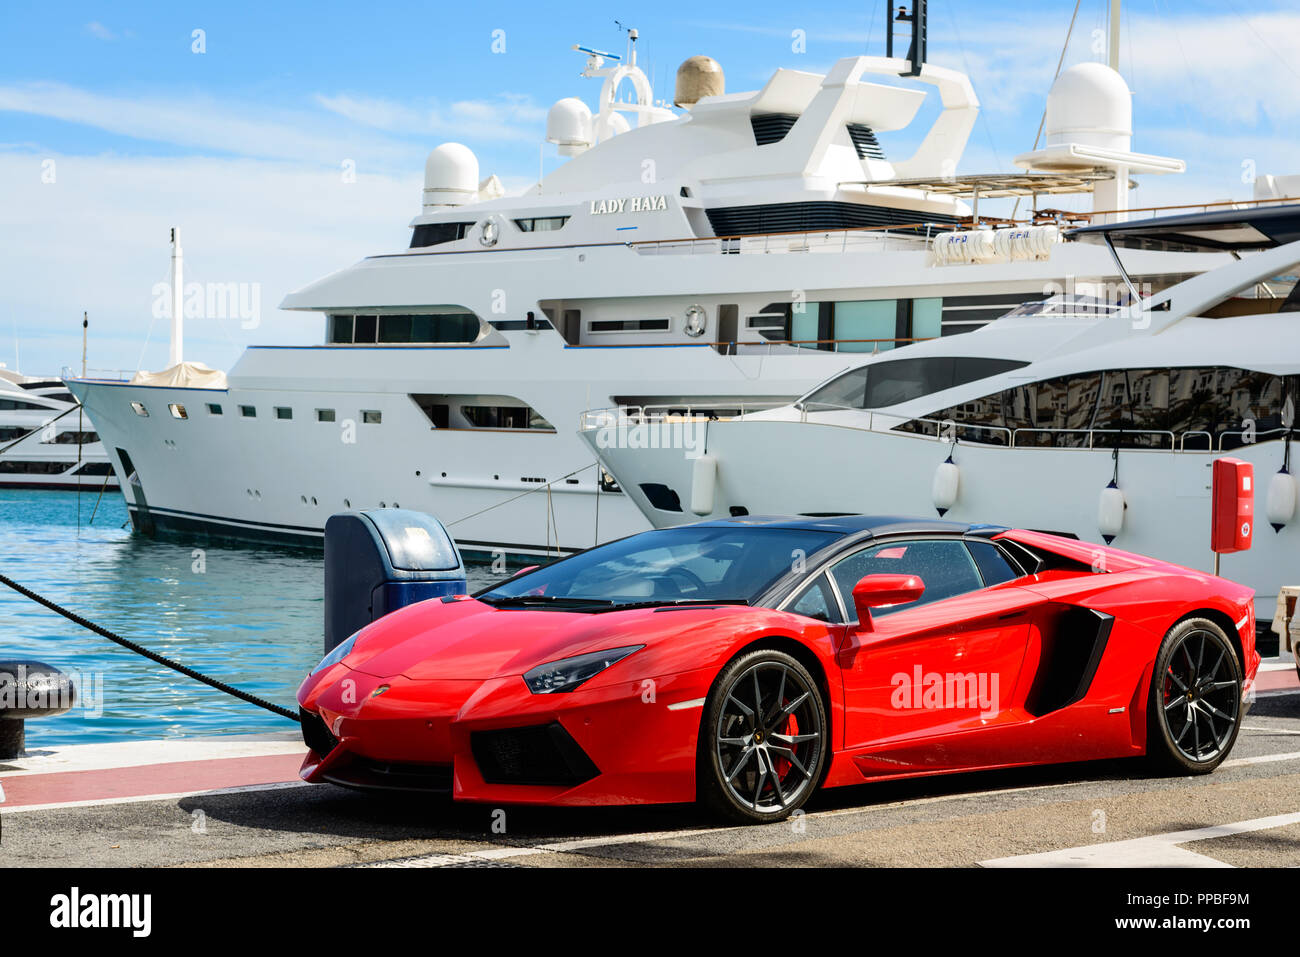 Sports cars parked next to yachts in the Luxury marina of Puerto